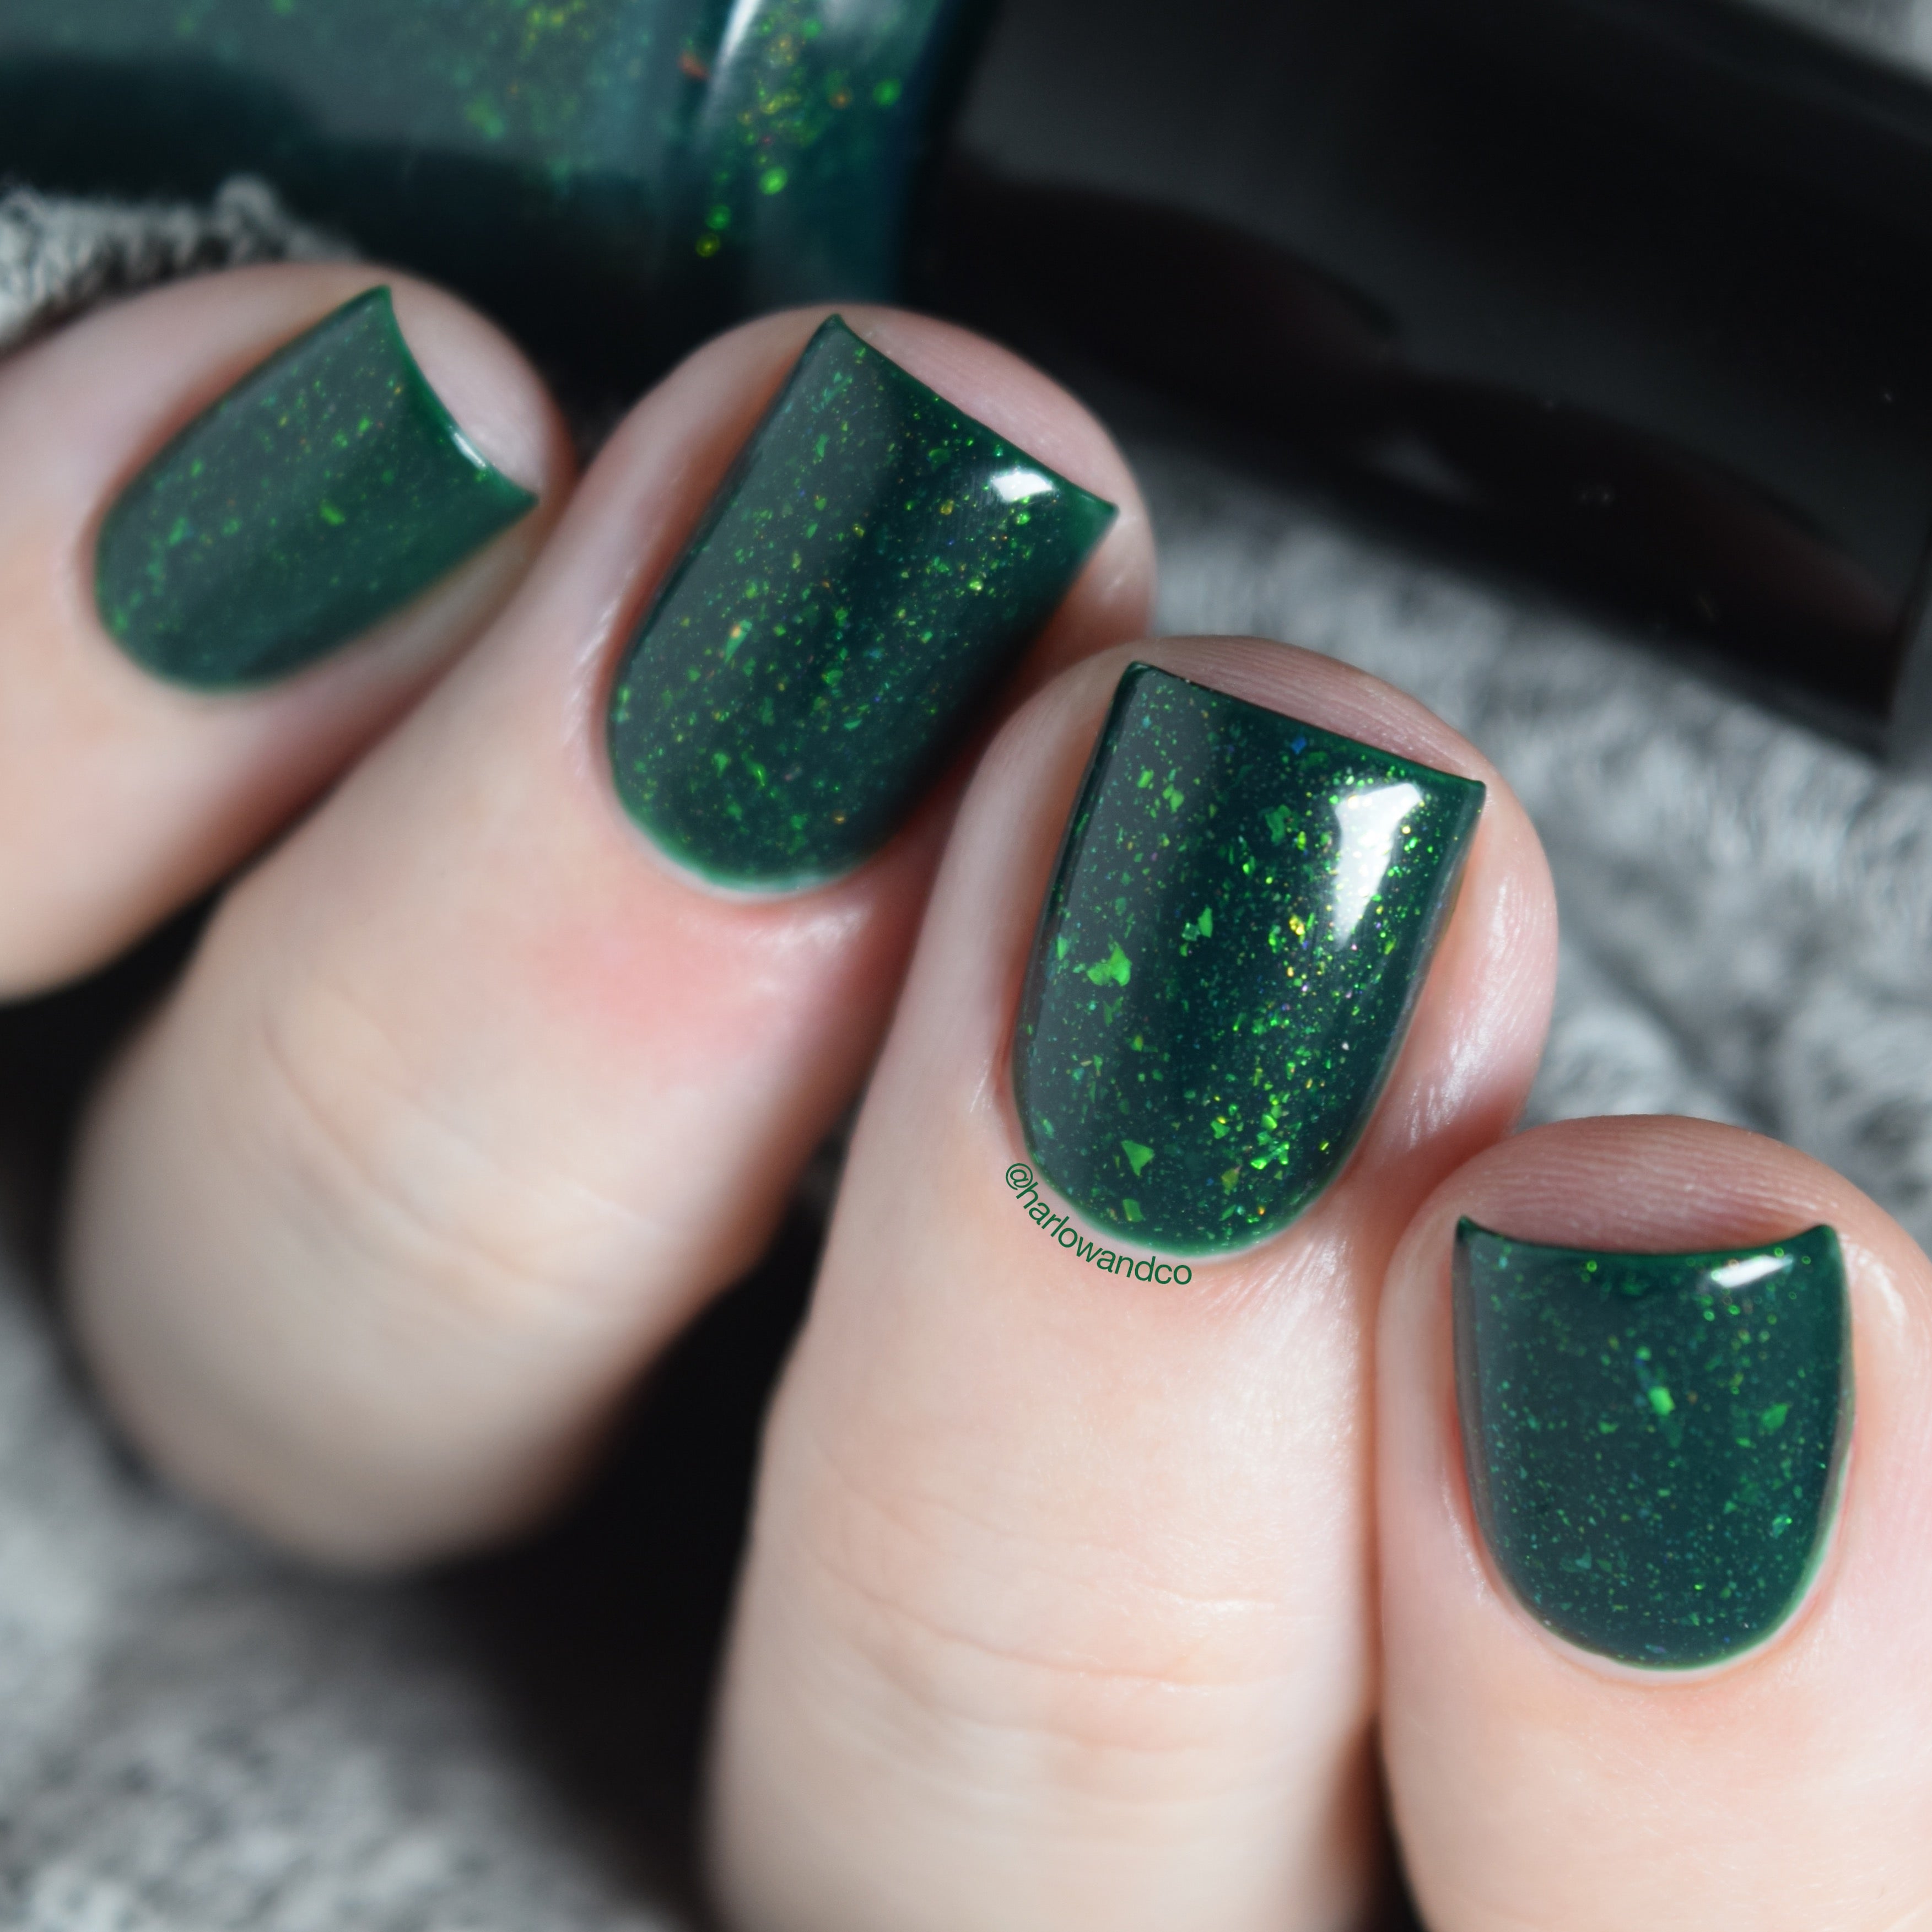 Girly Bits All I Want Fir Christmas Is You green nail polish December 2018 CotM Series